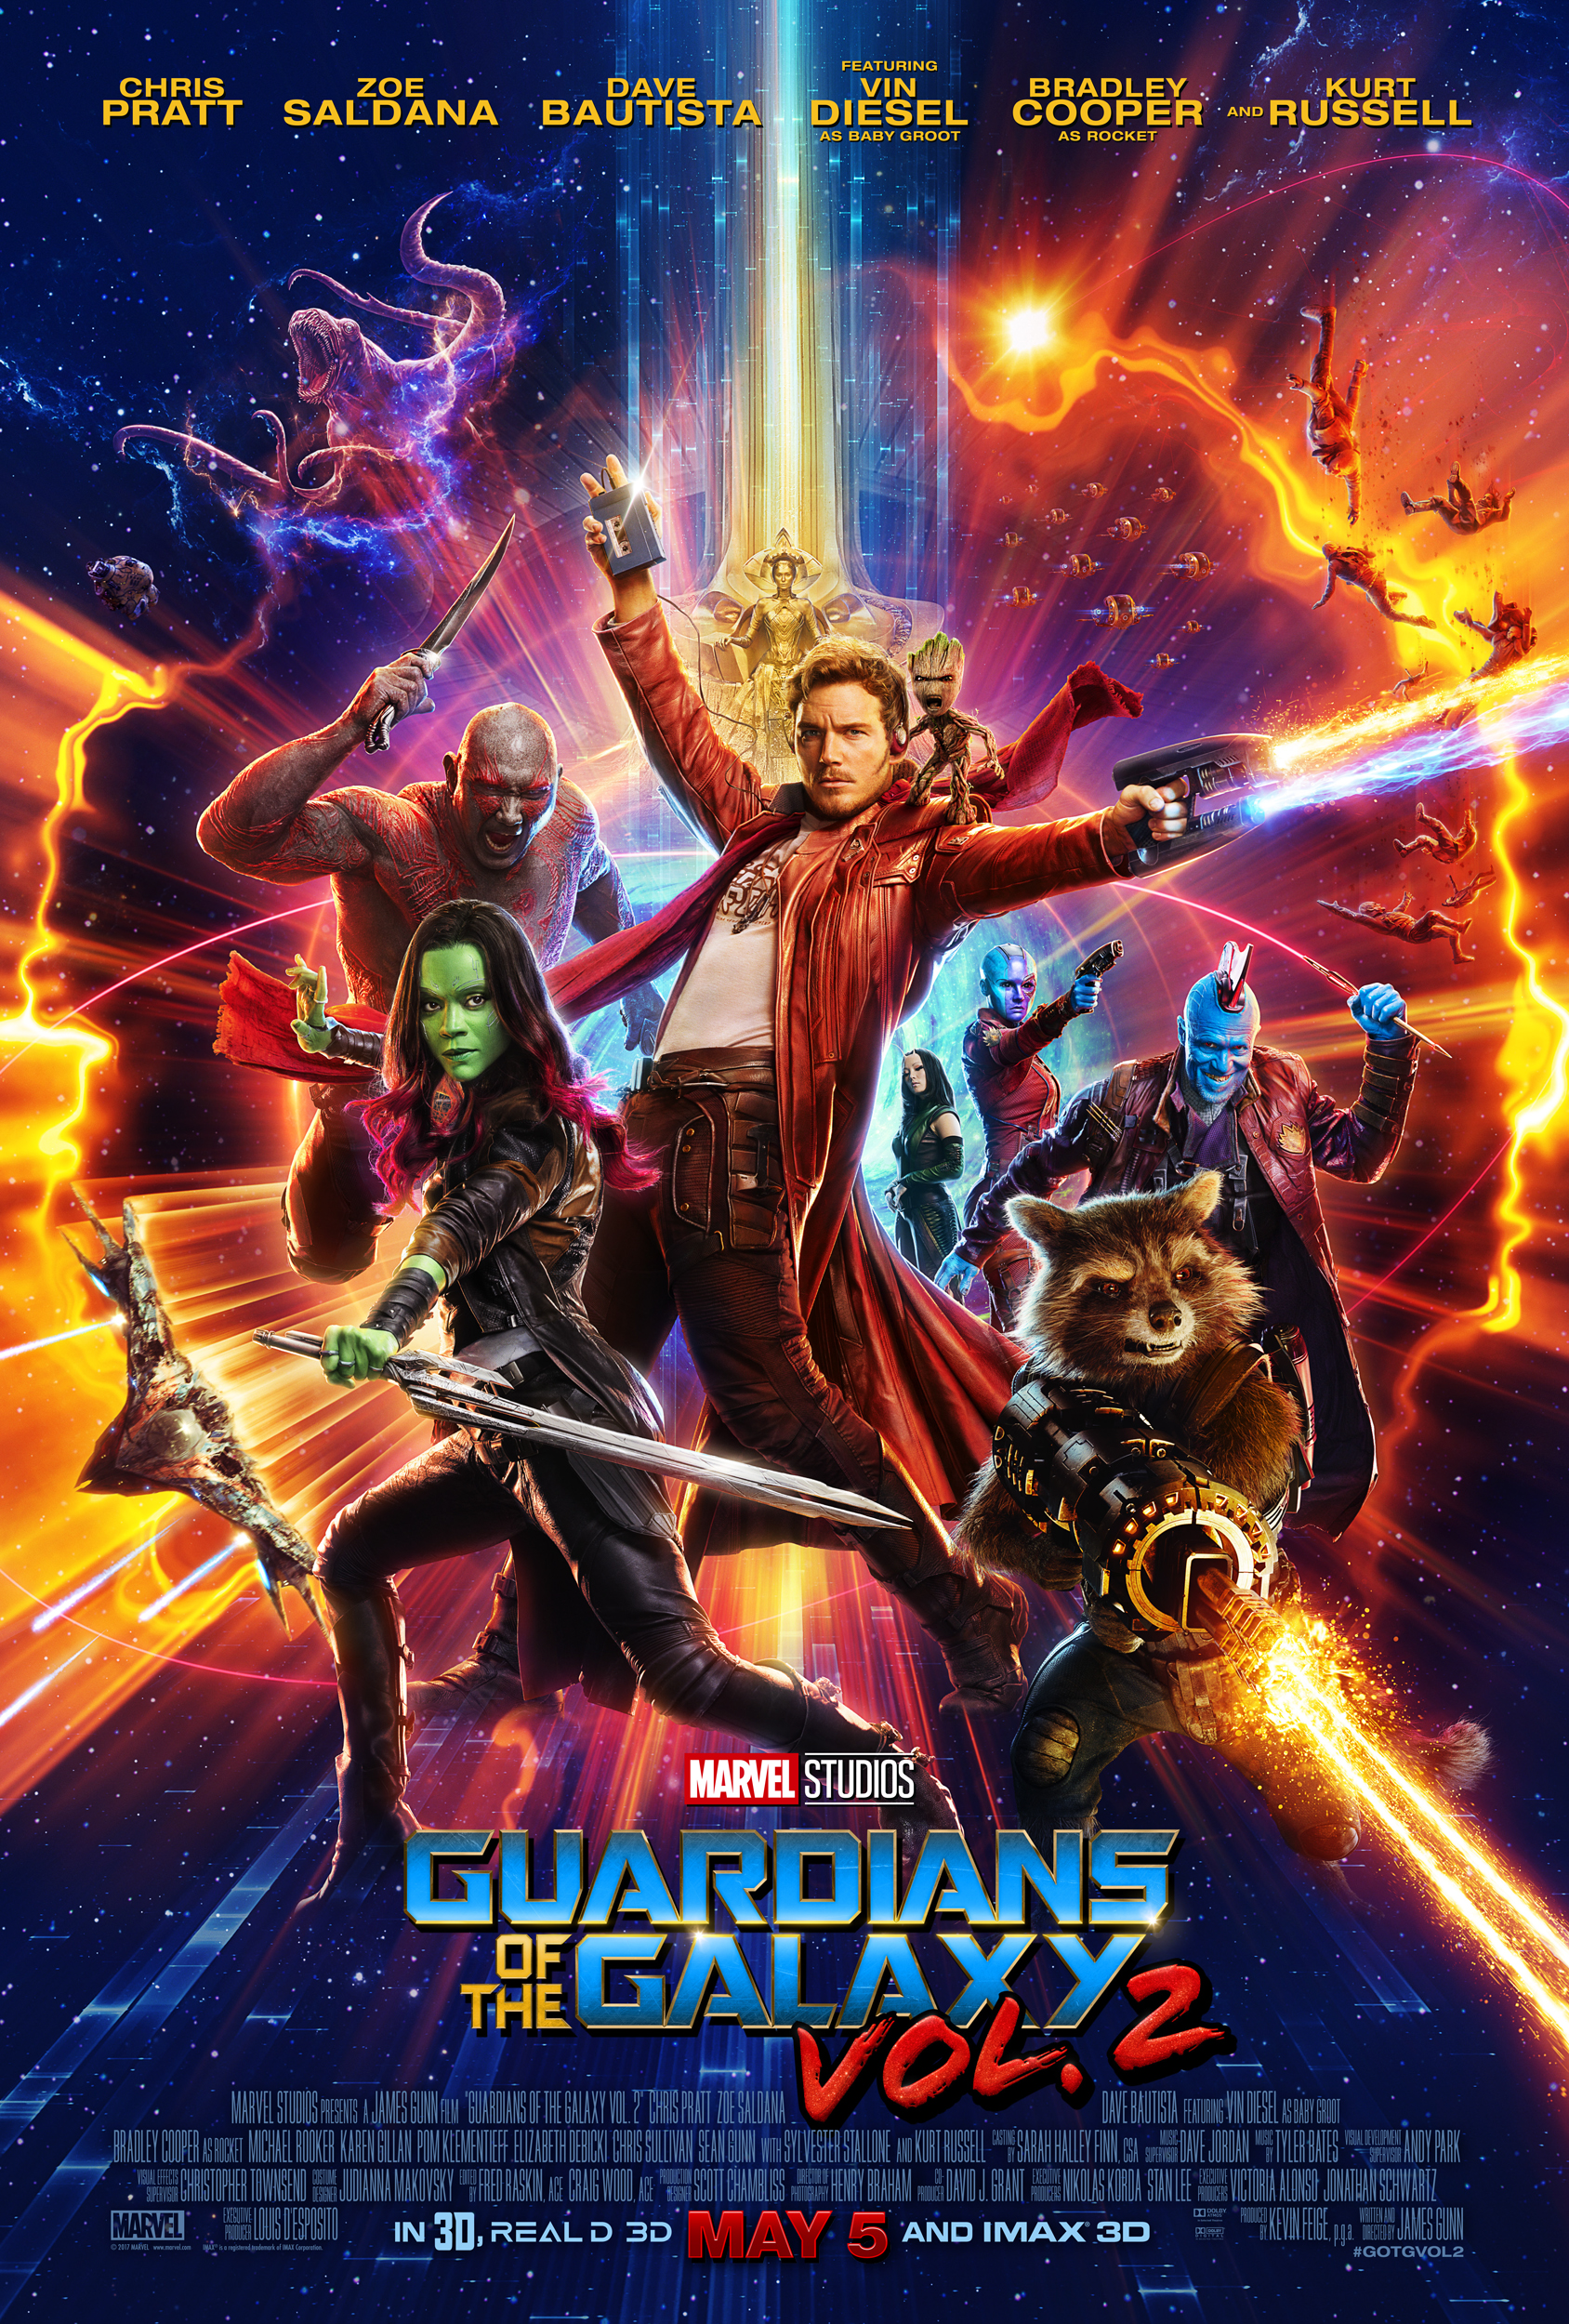 Marvel Studios' GUARDIANS OF THE GALAXY VOL. 2 New Trailer and Poster